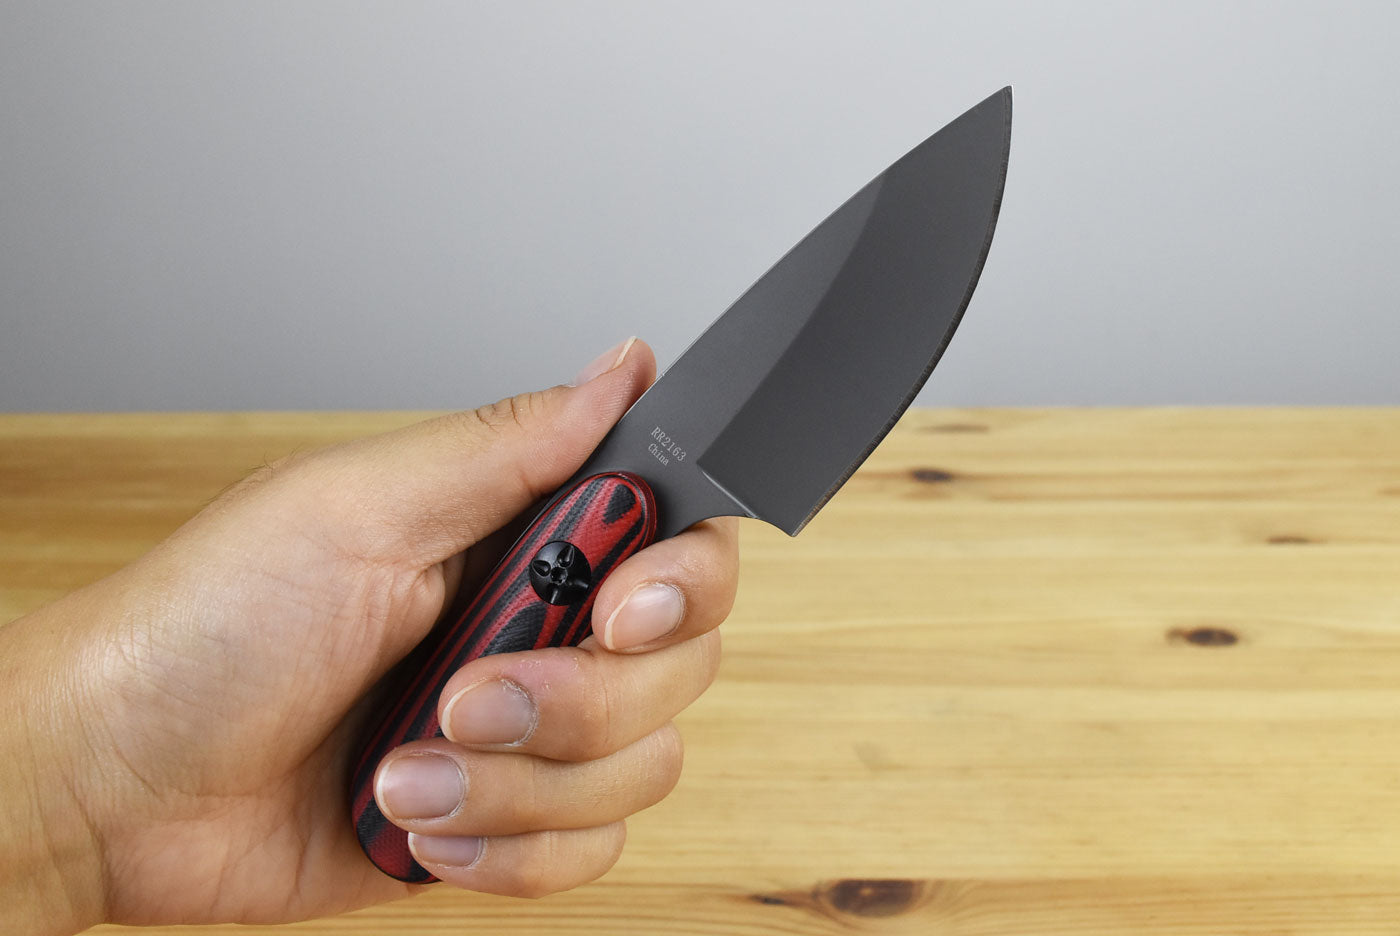 Rough Ryder 2163 Fixed Blade (Black and Red G10)